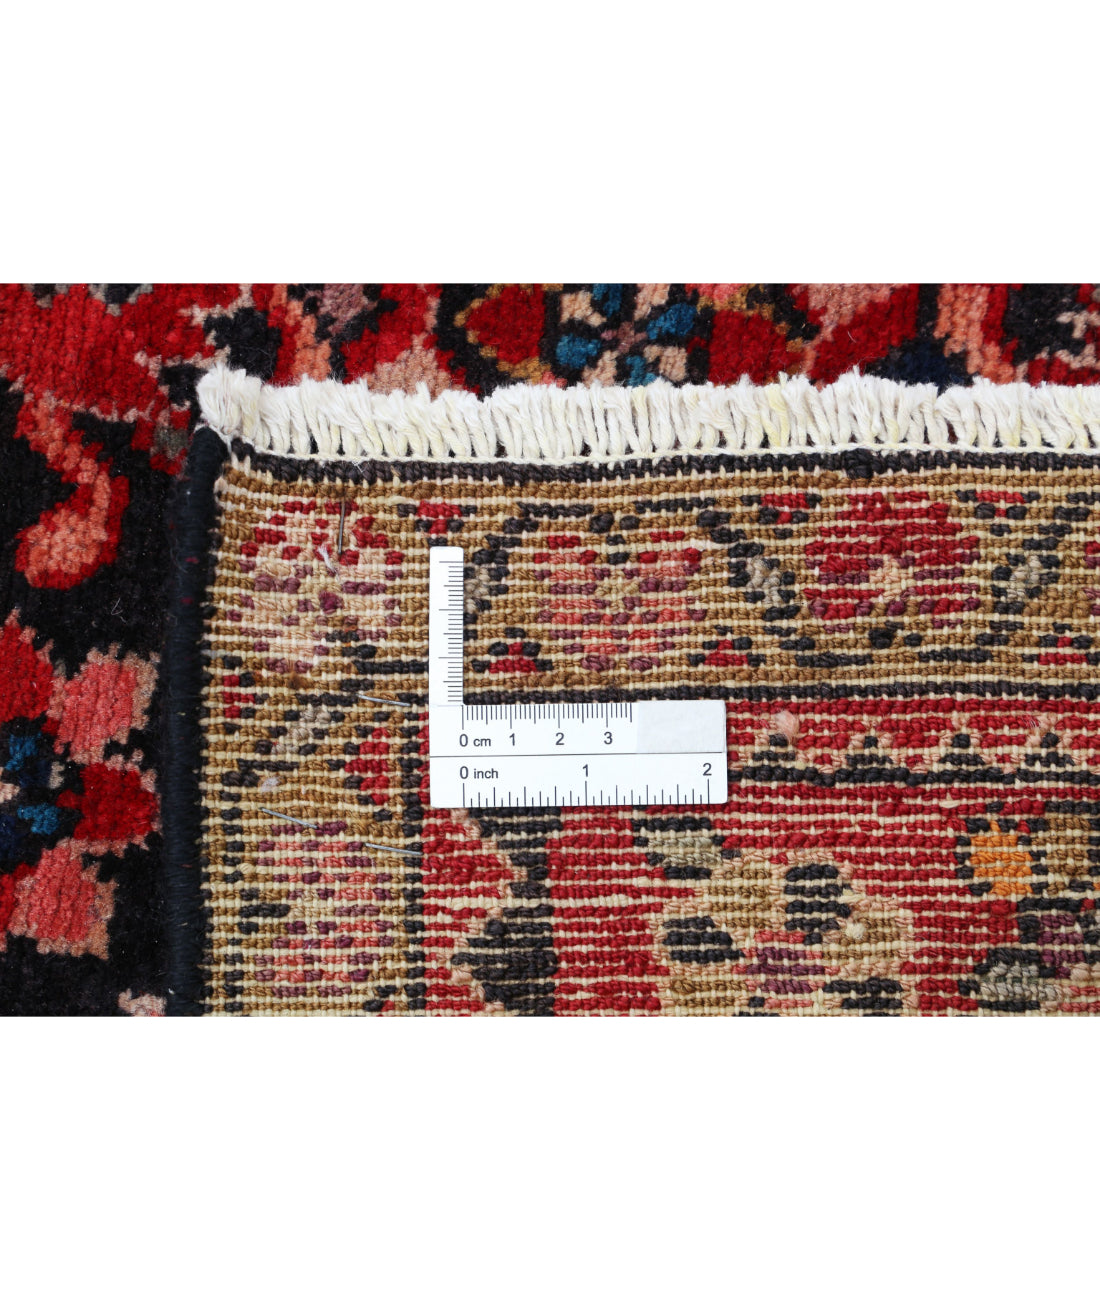 Hand Knotted Persian Hamadan Wool Rug - 6'11'' x 9'11'' 6'11'' x 9'11'' (208 X 298) / Black / Red